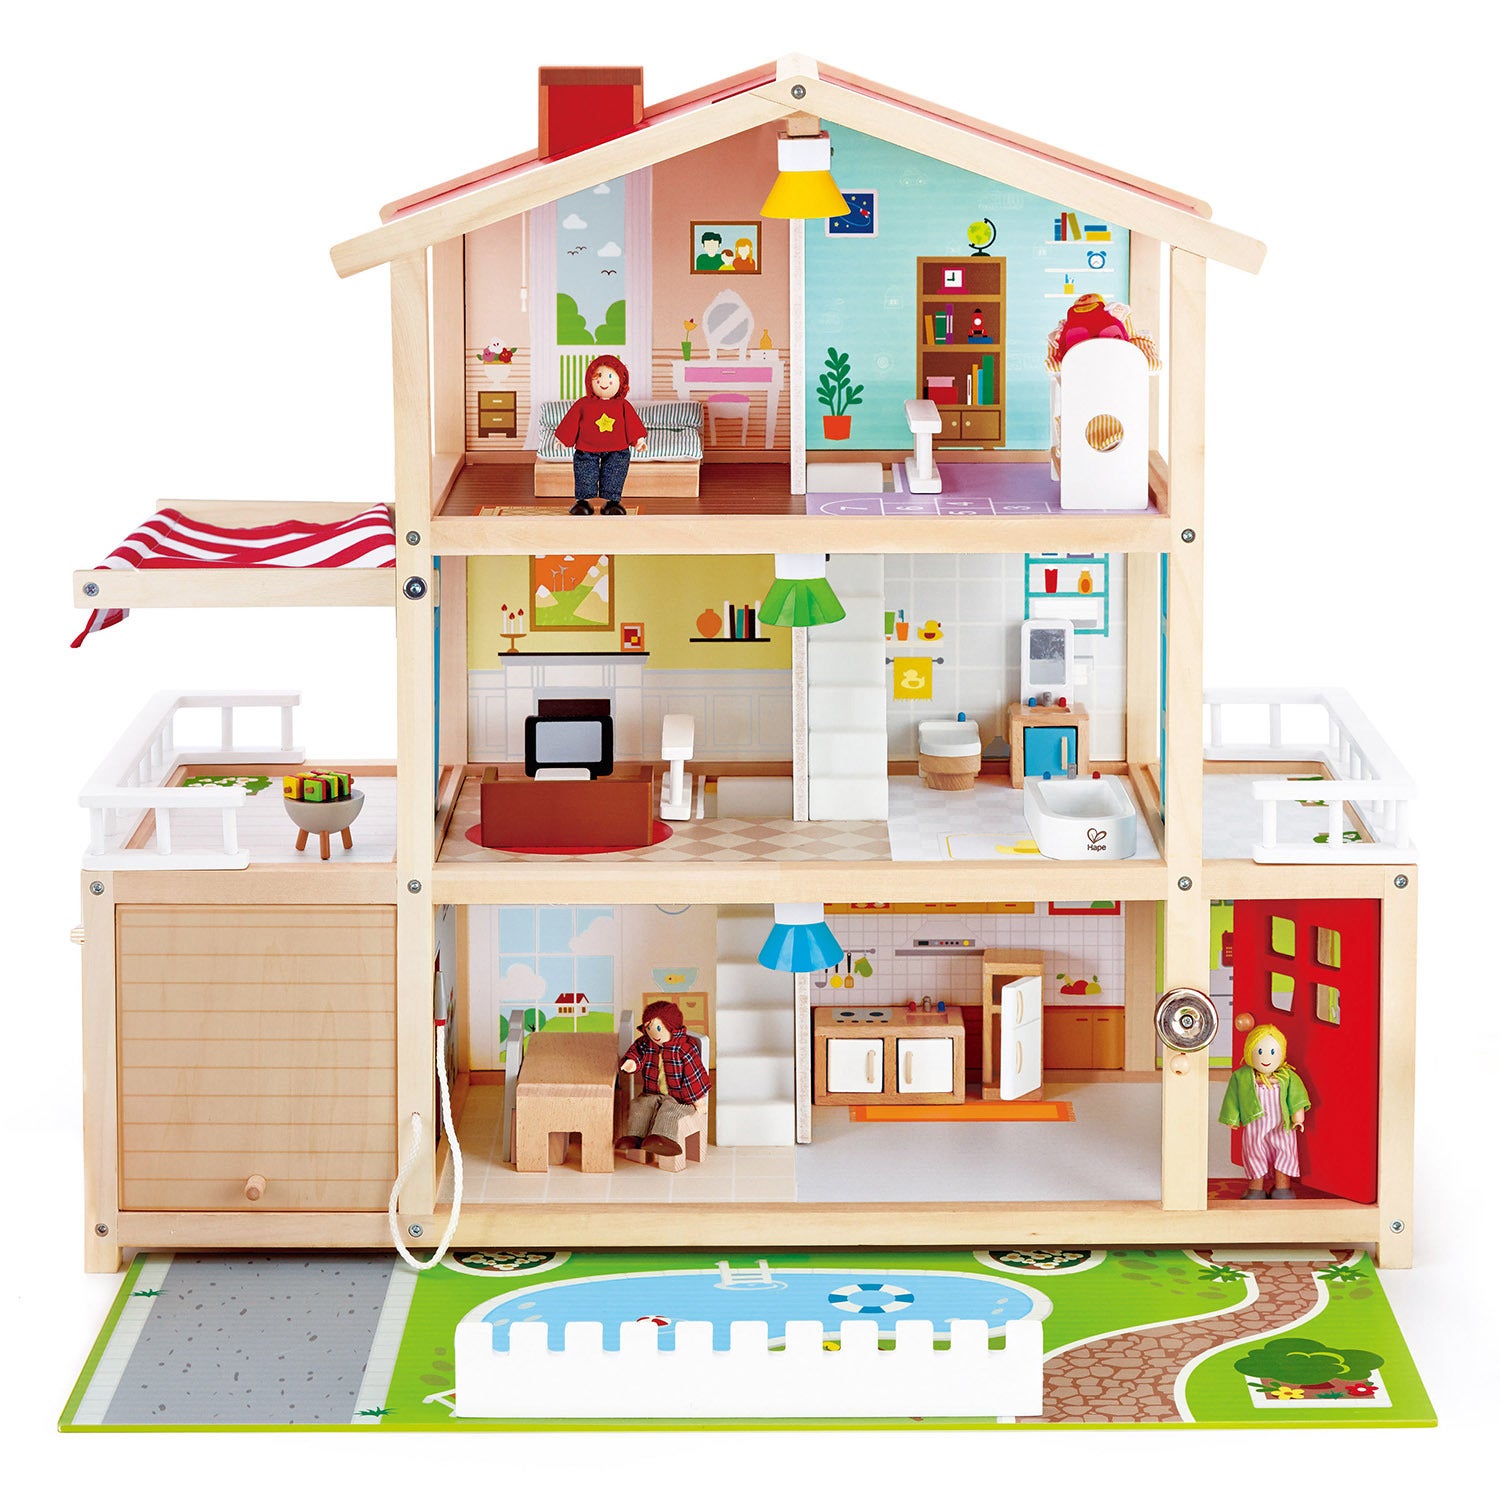 29pc Hape 80cm Doll Family Mansion Realistic House Kids Activity Wooden Toy 3y+